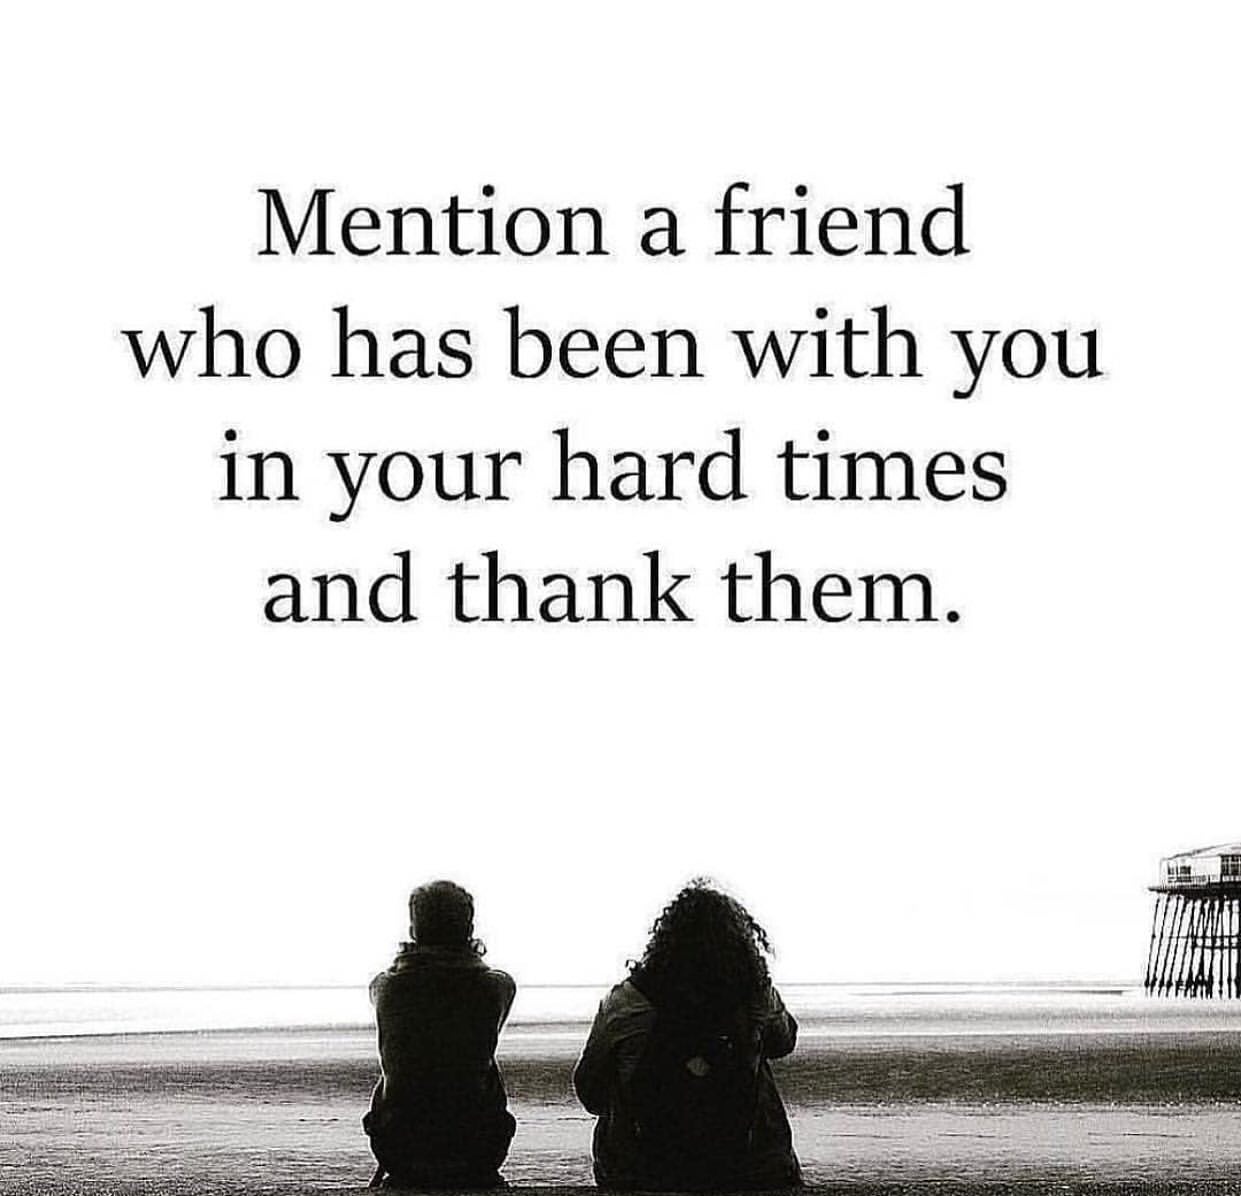 Mention a friend who has been with you in your hard times and thank them.